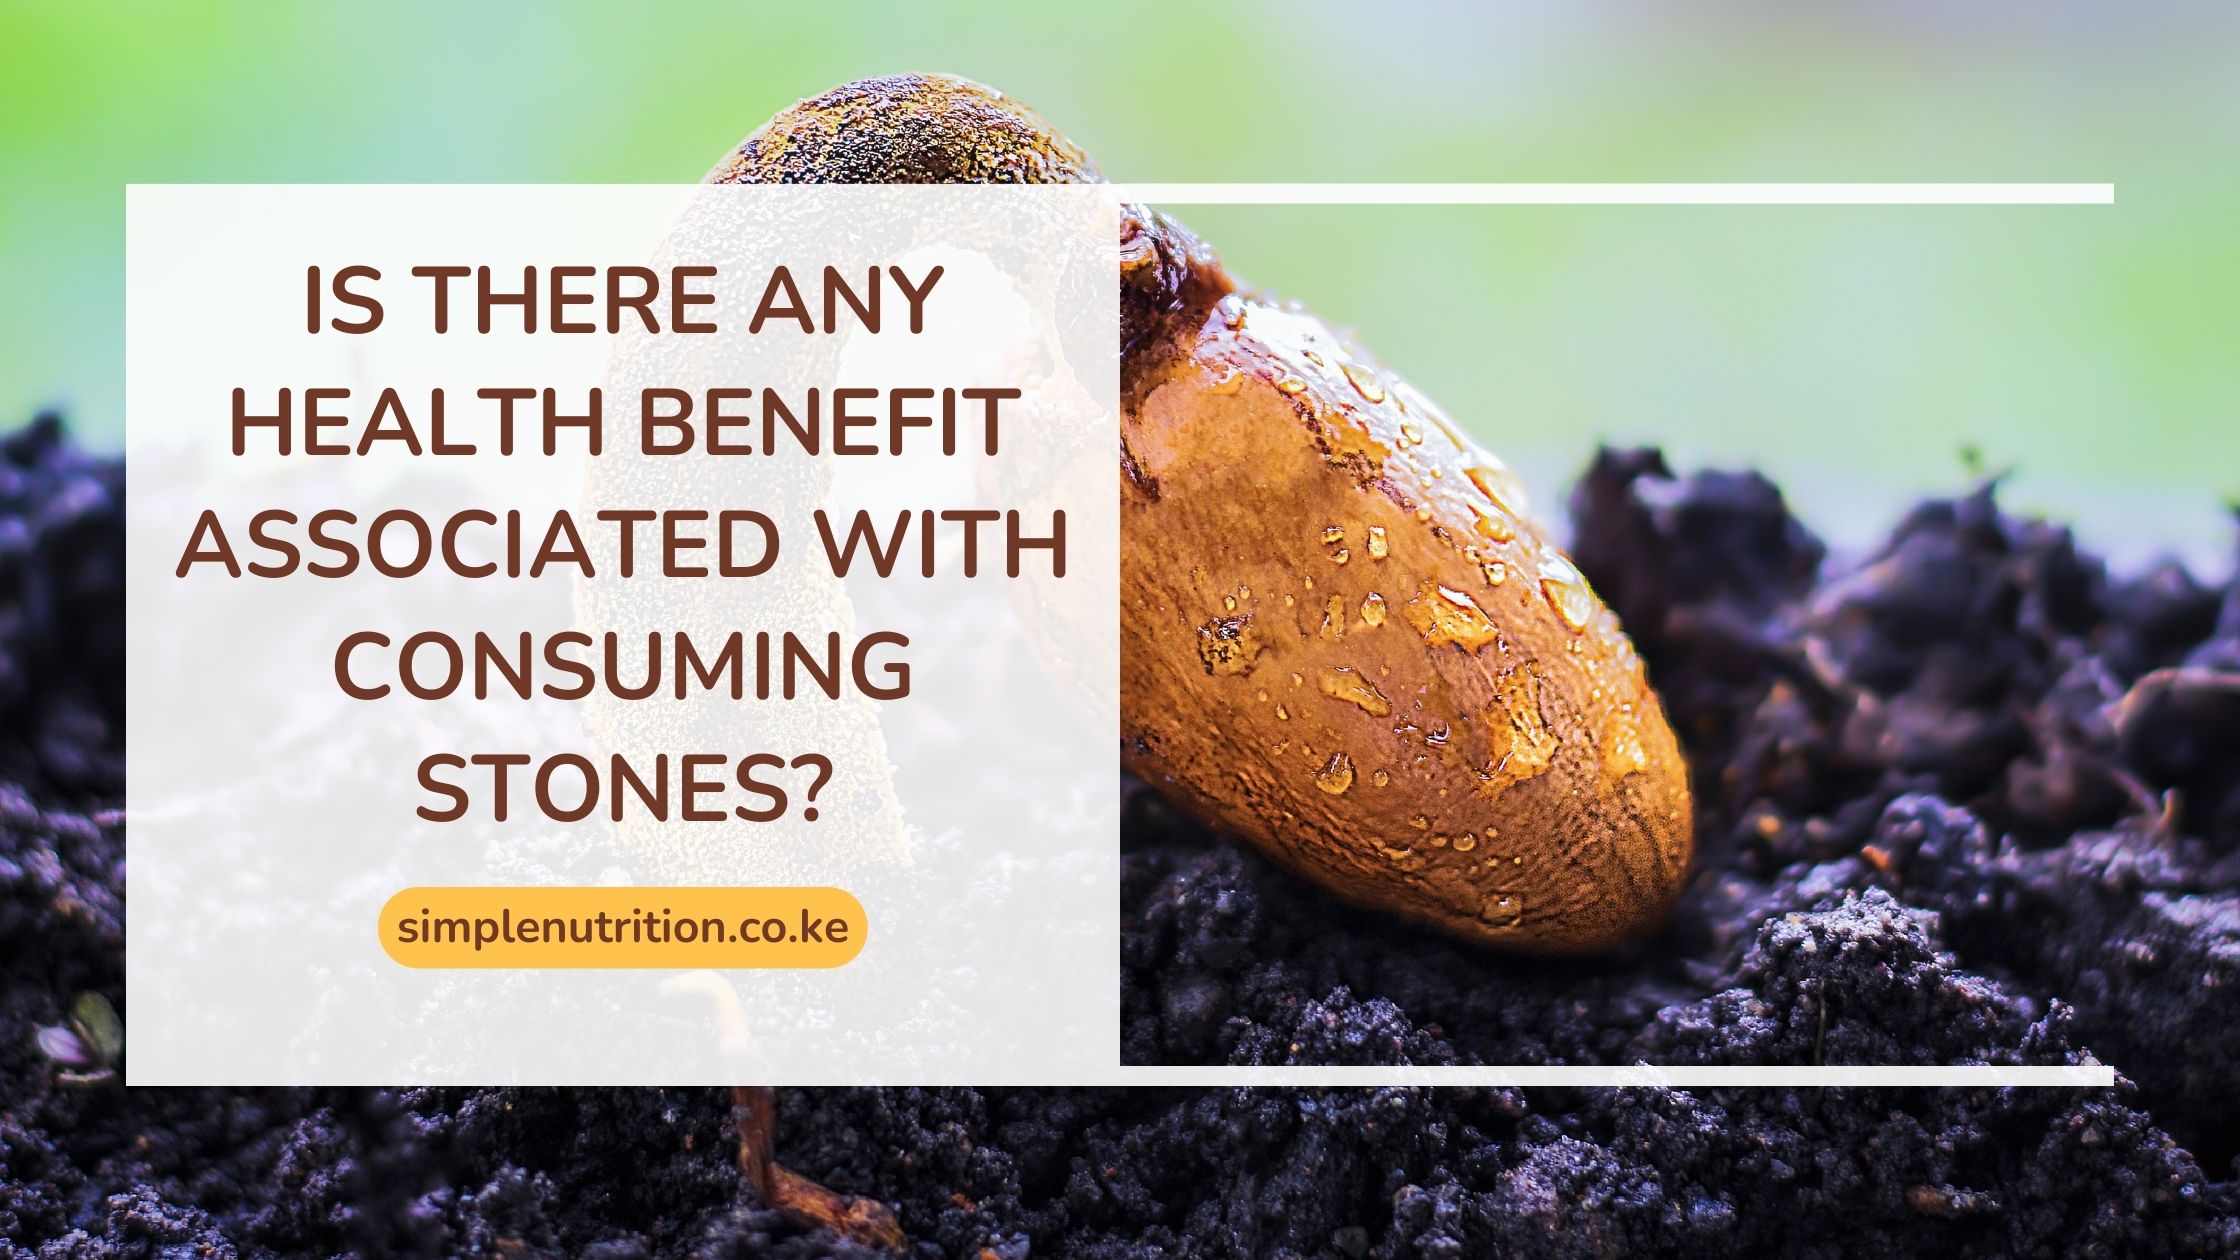 Is there any health benefit associated with consuming stones?